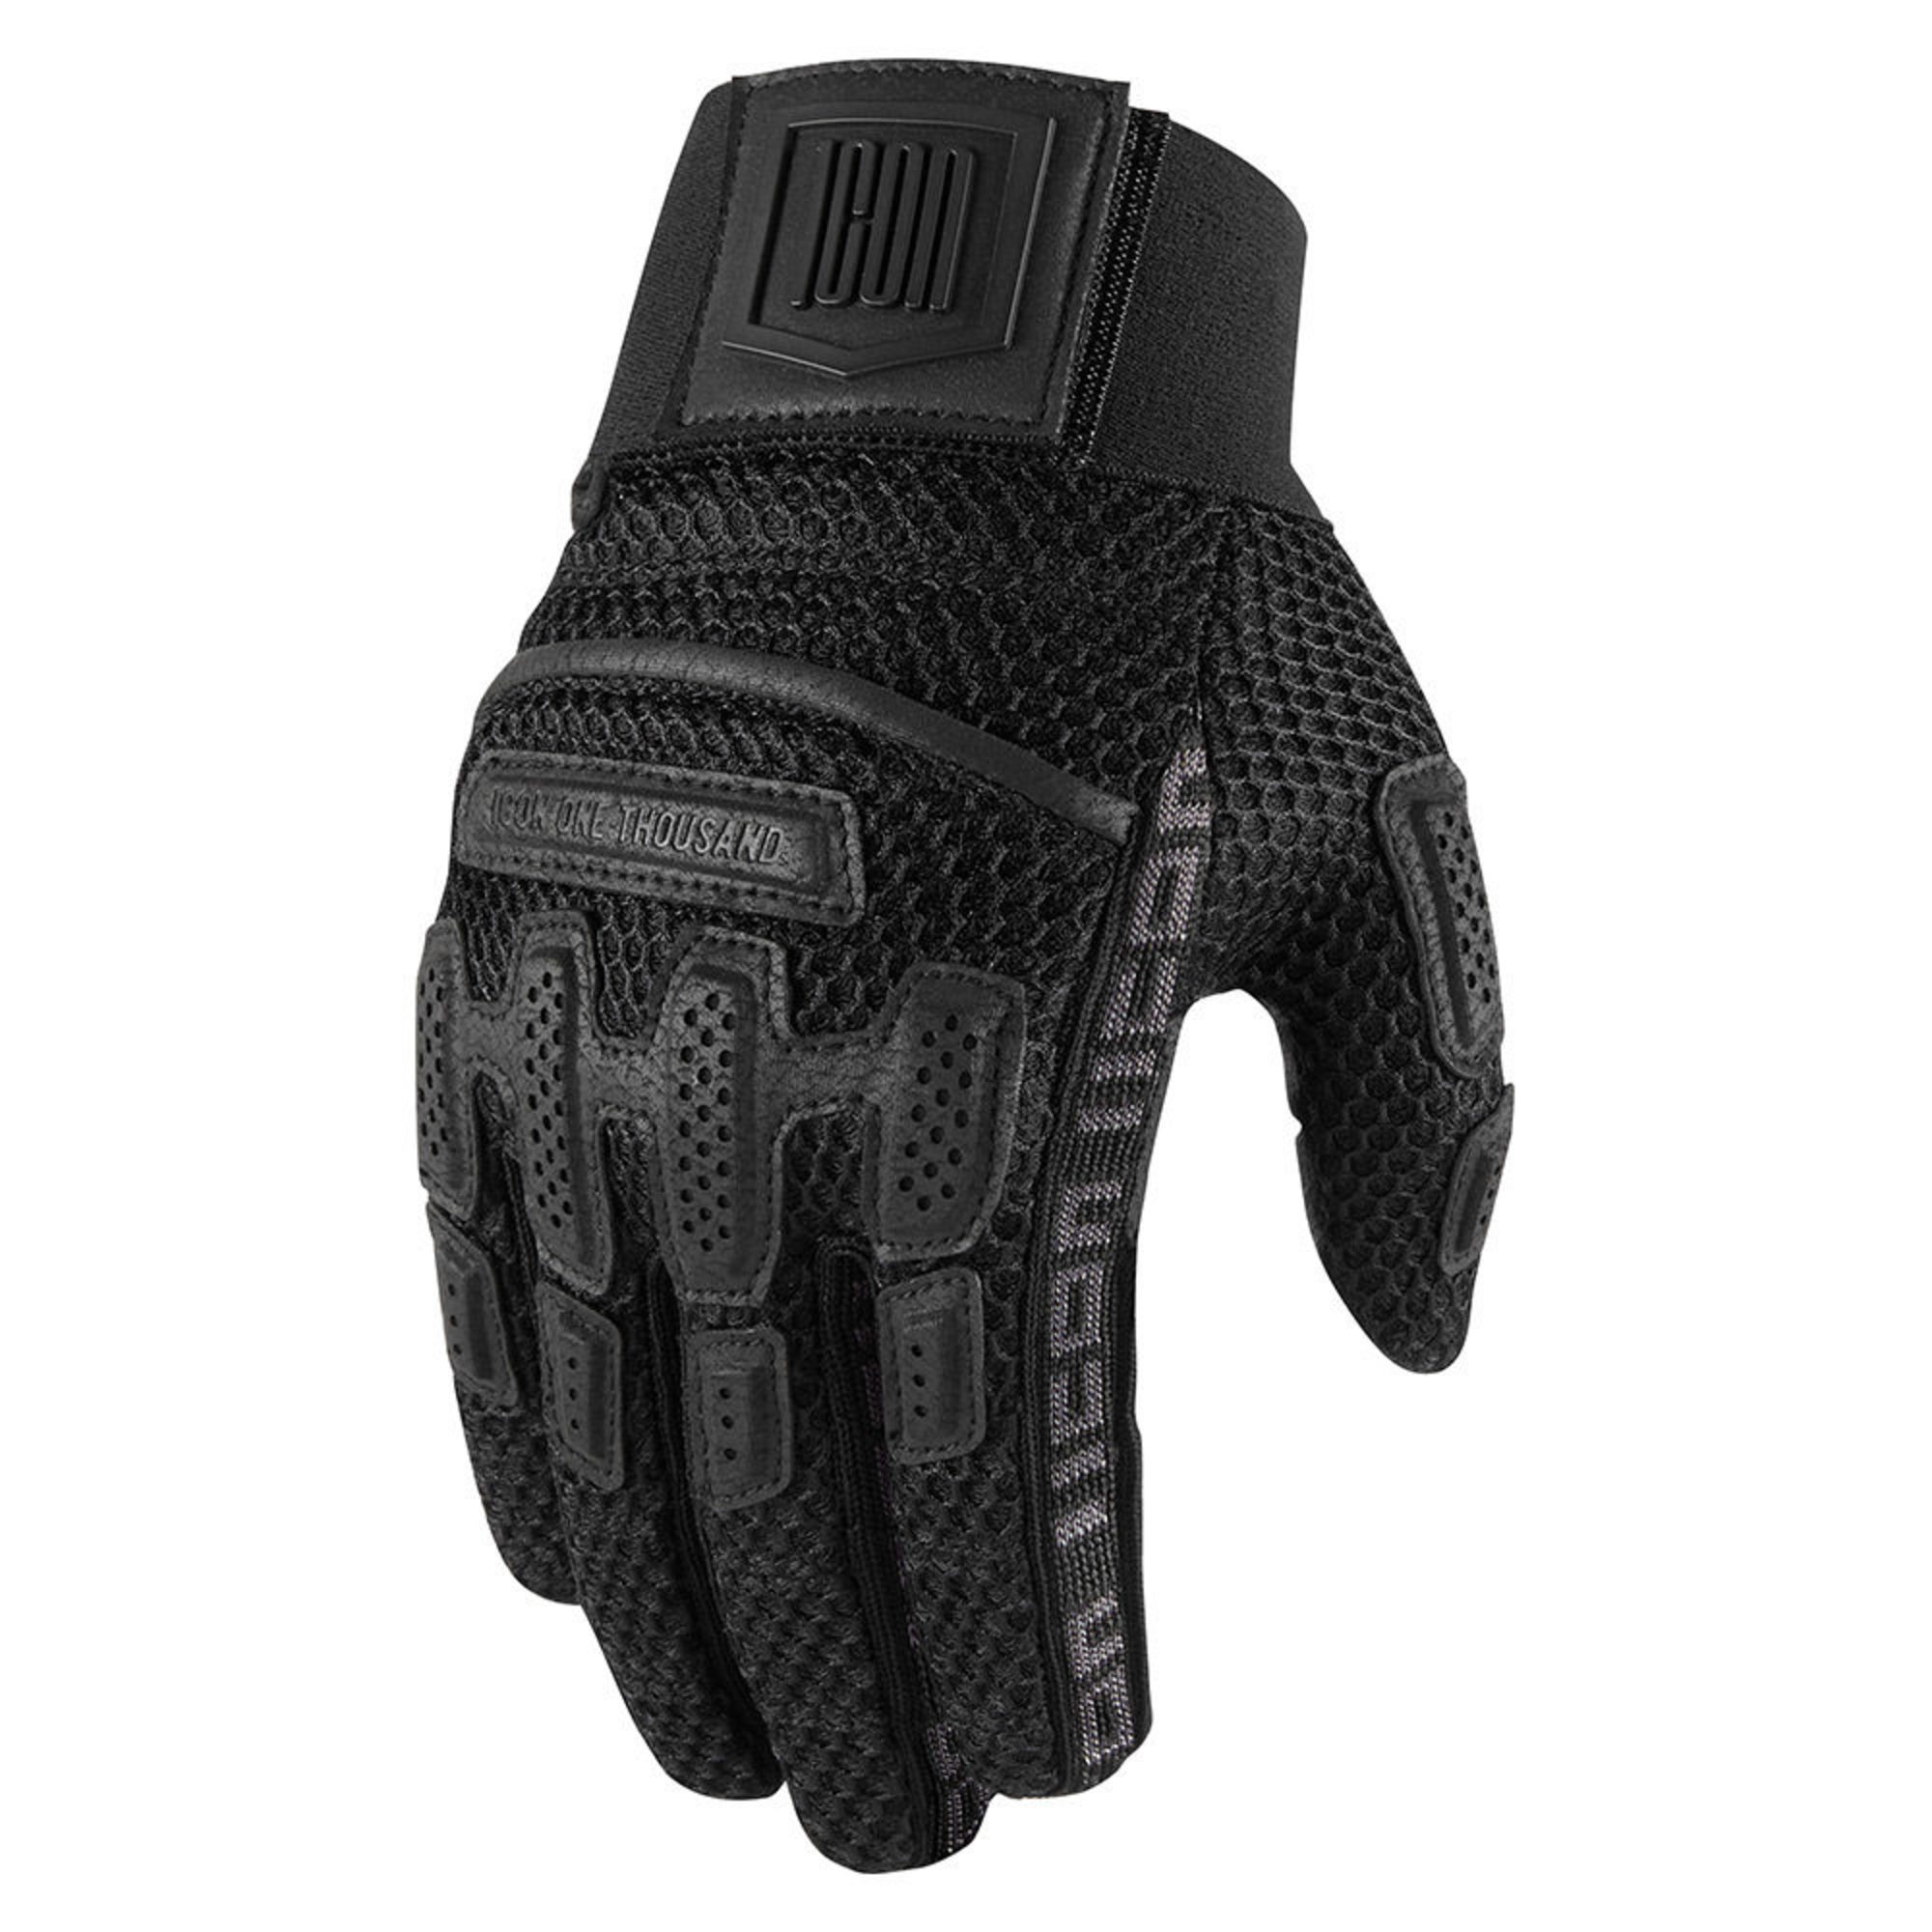 icon mesh gloves for men one thousand brigand